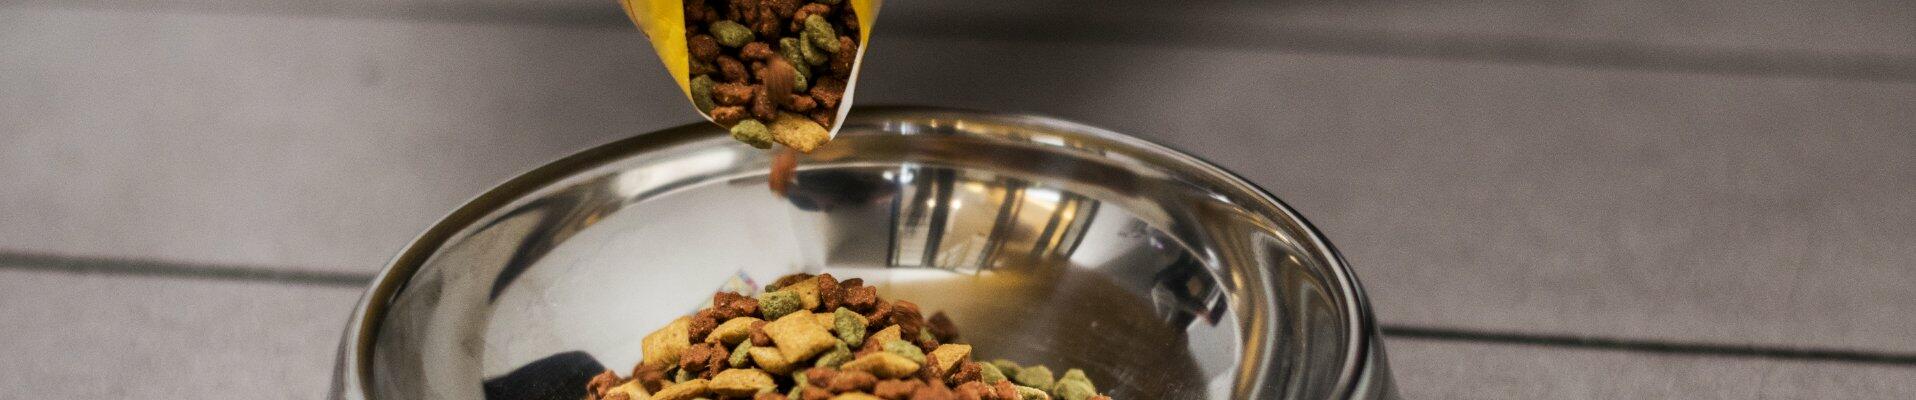 Pet food being poured into a metal bowl